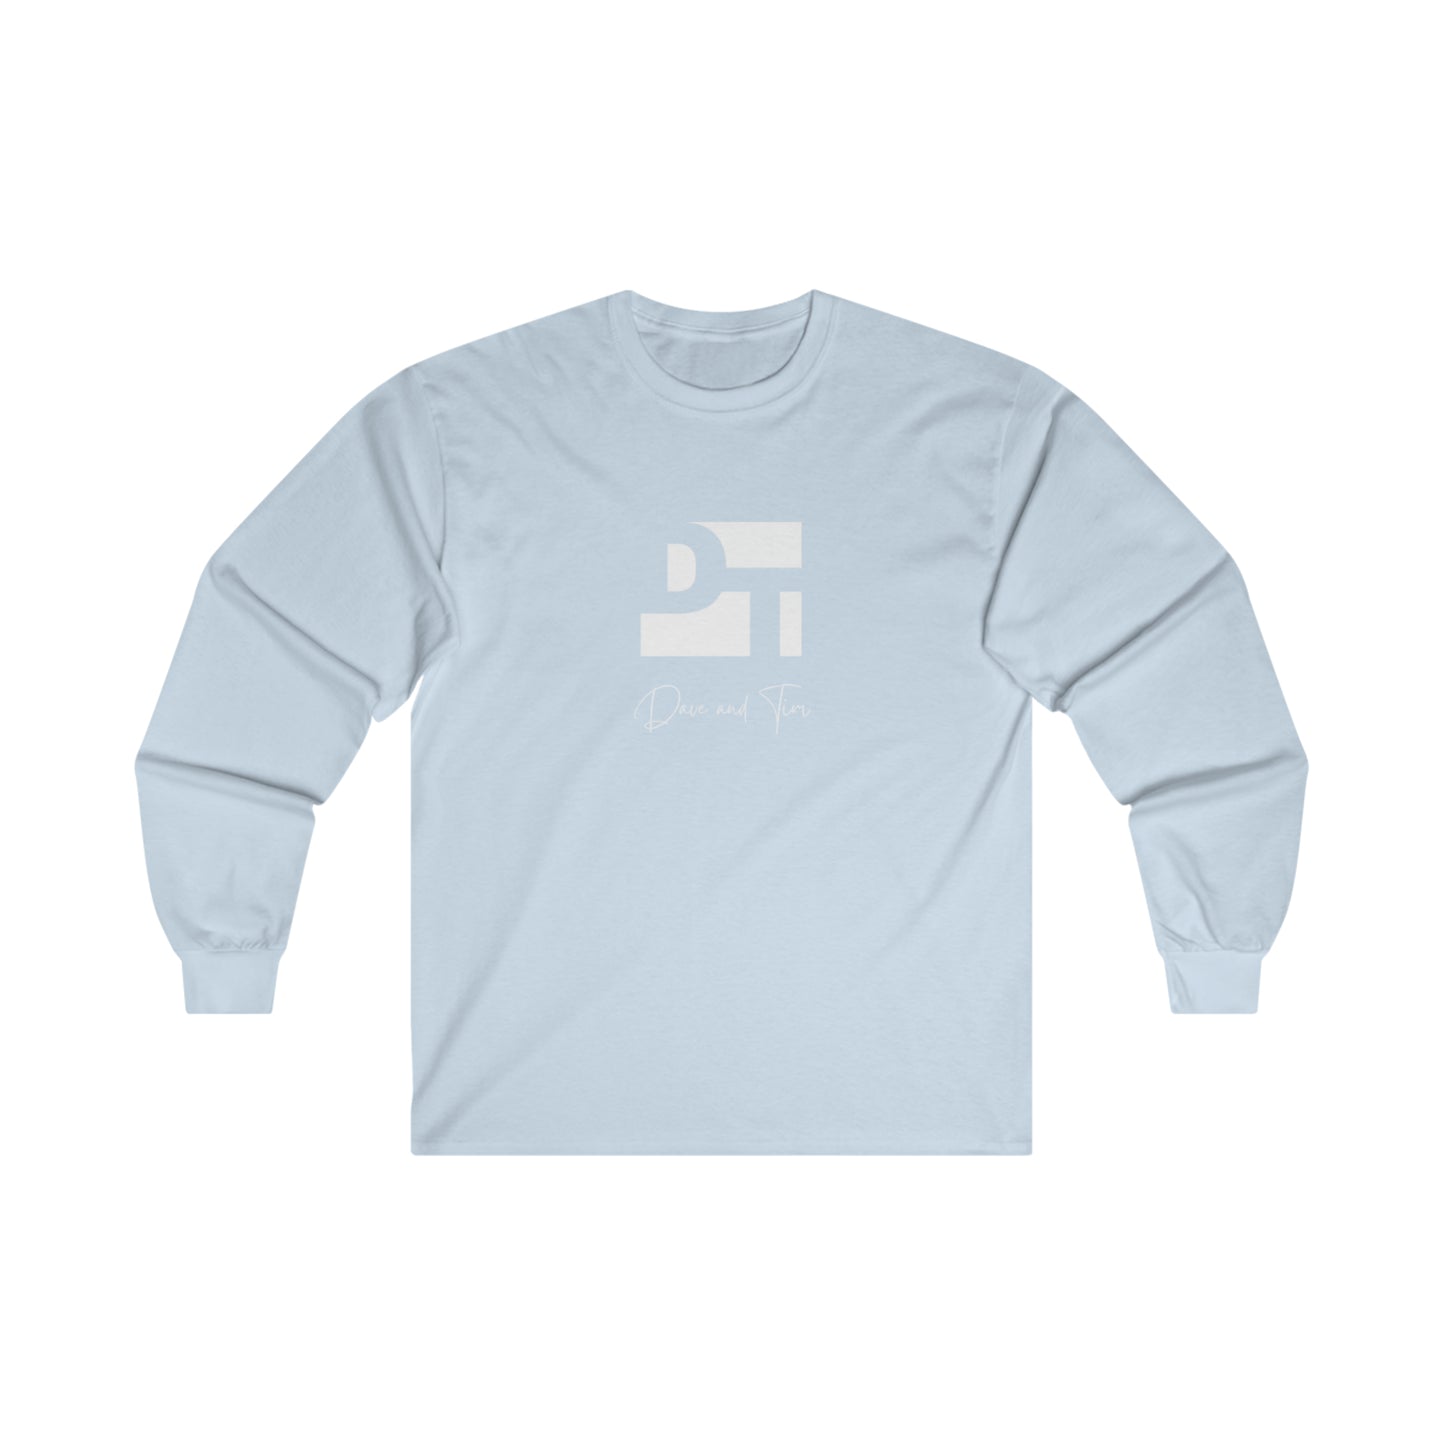 Dave And Tim Shapes Long Sleeve DMB Tee